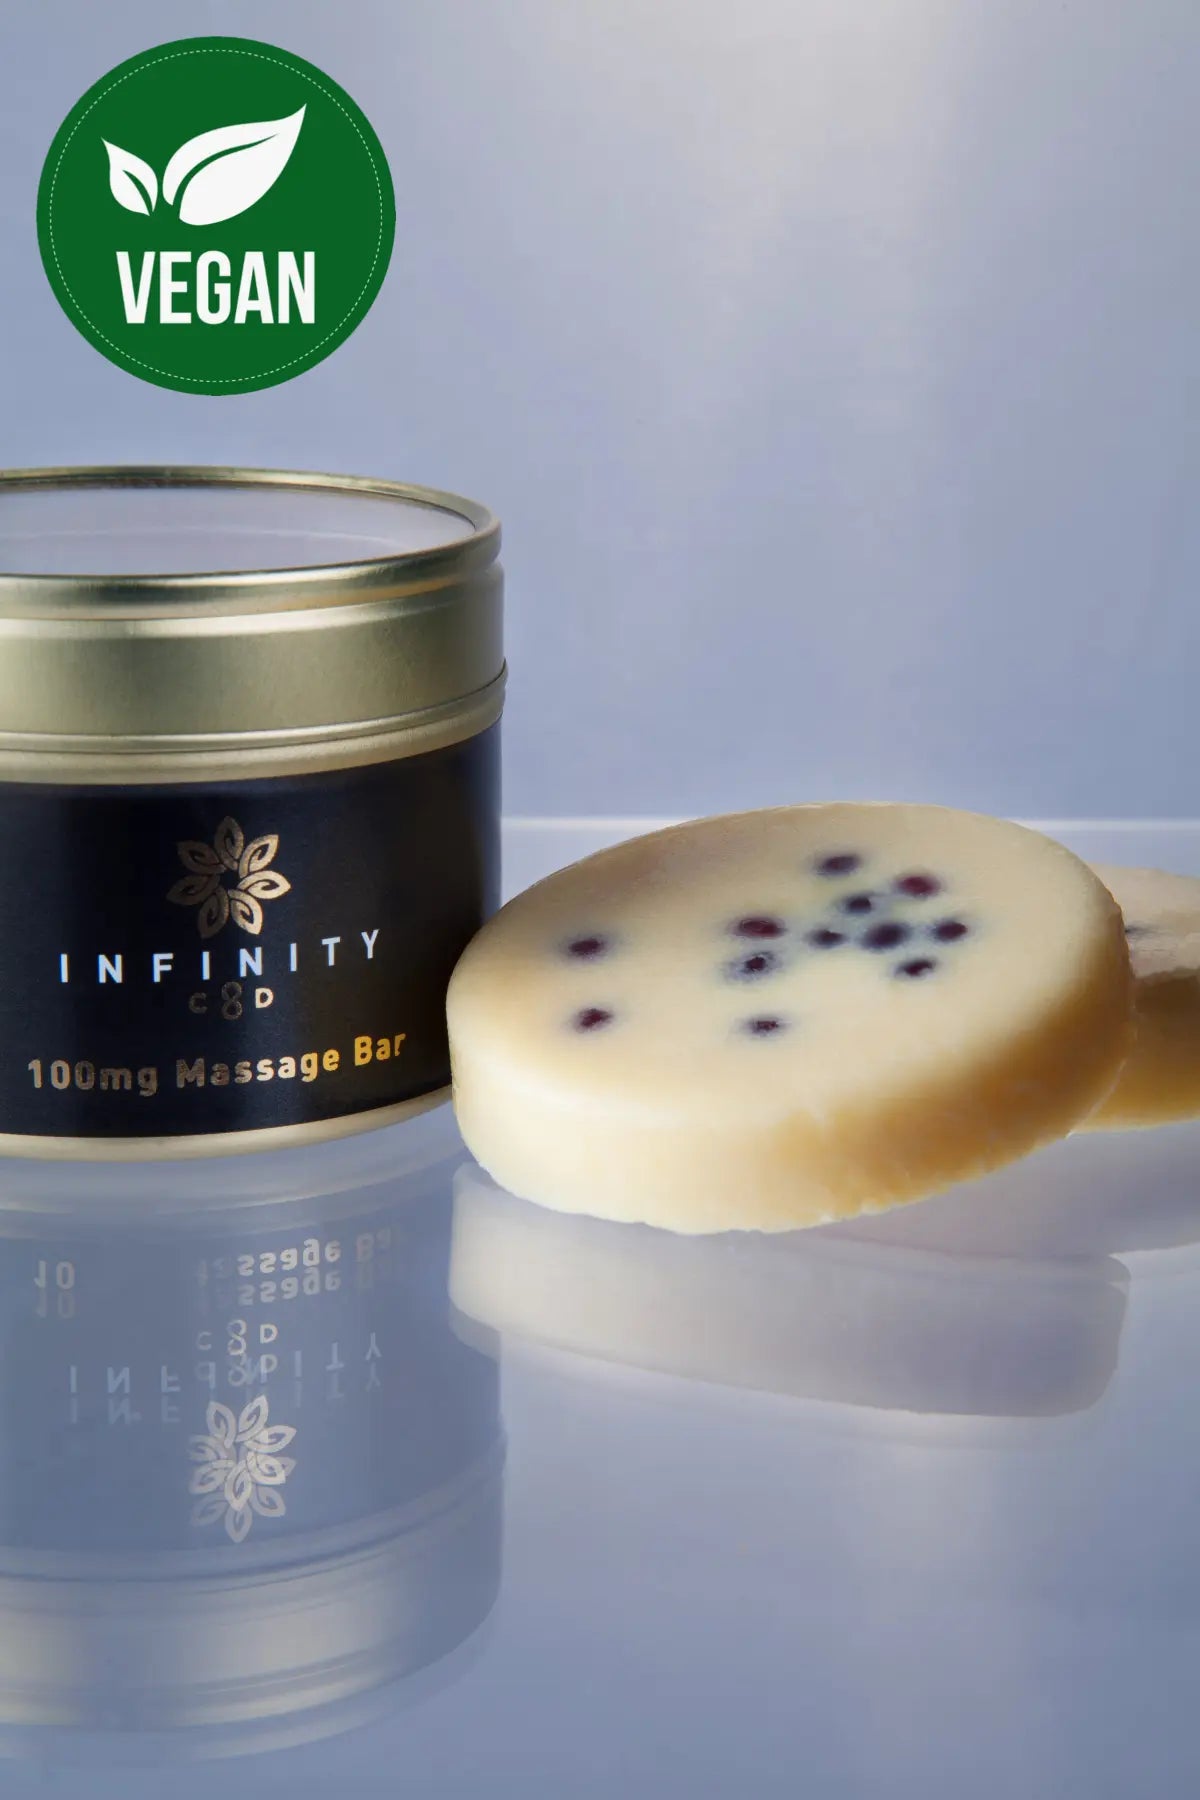 CBD Massage bar Vegan Friendly and Lab Tested by Infinity CBD in Wales